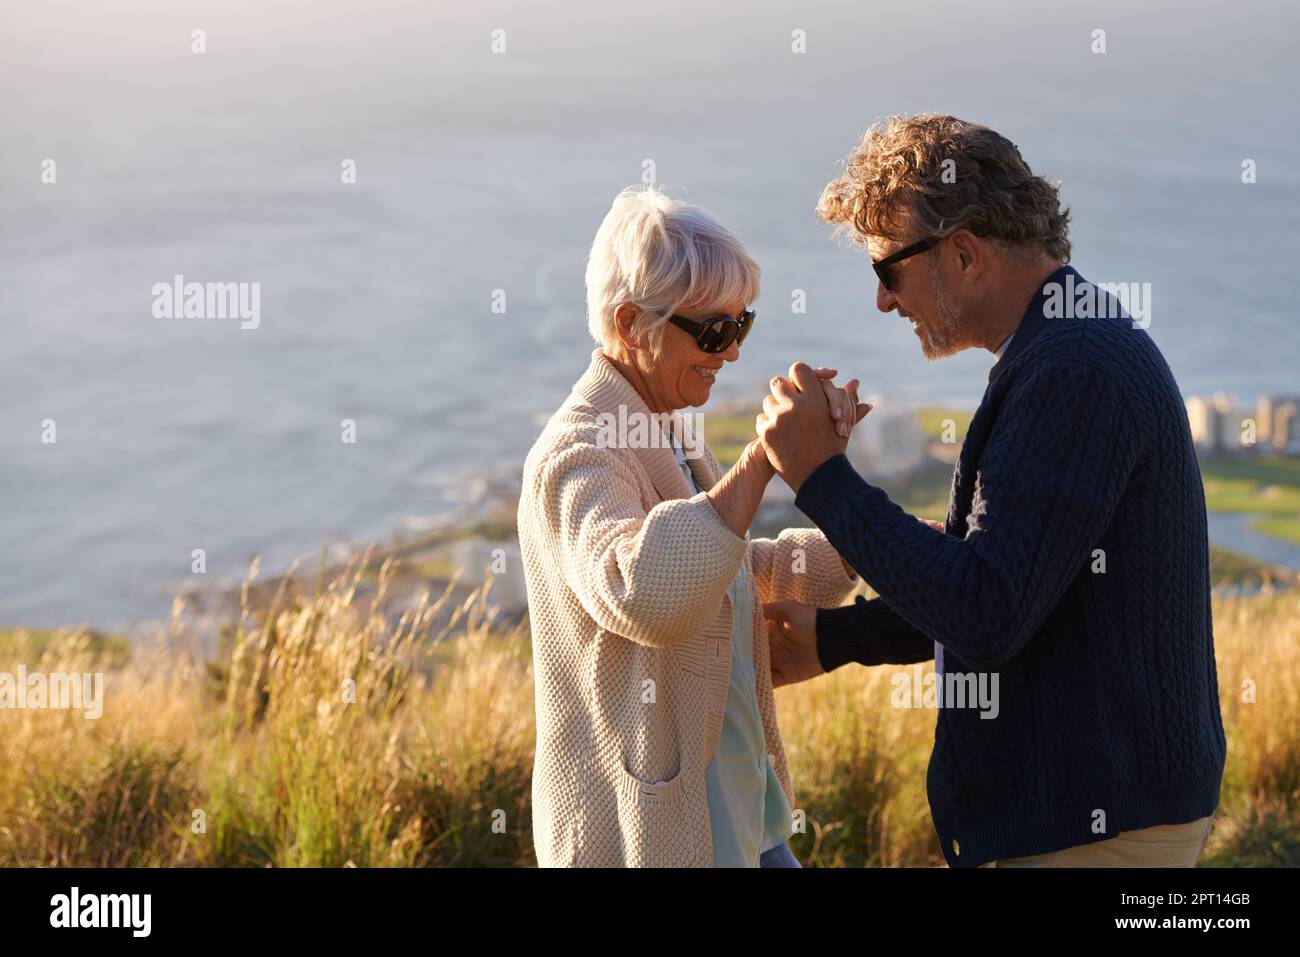 Shall we dance. Cropped view of a senior couple dancing on a hillside together Stock Photo